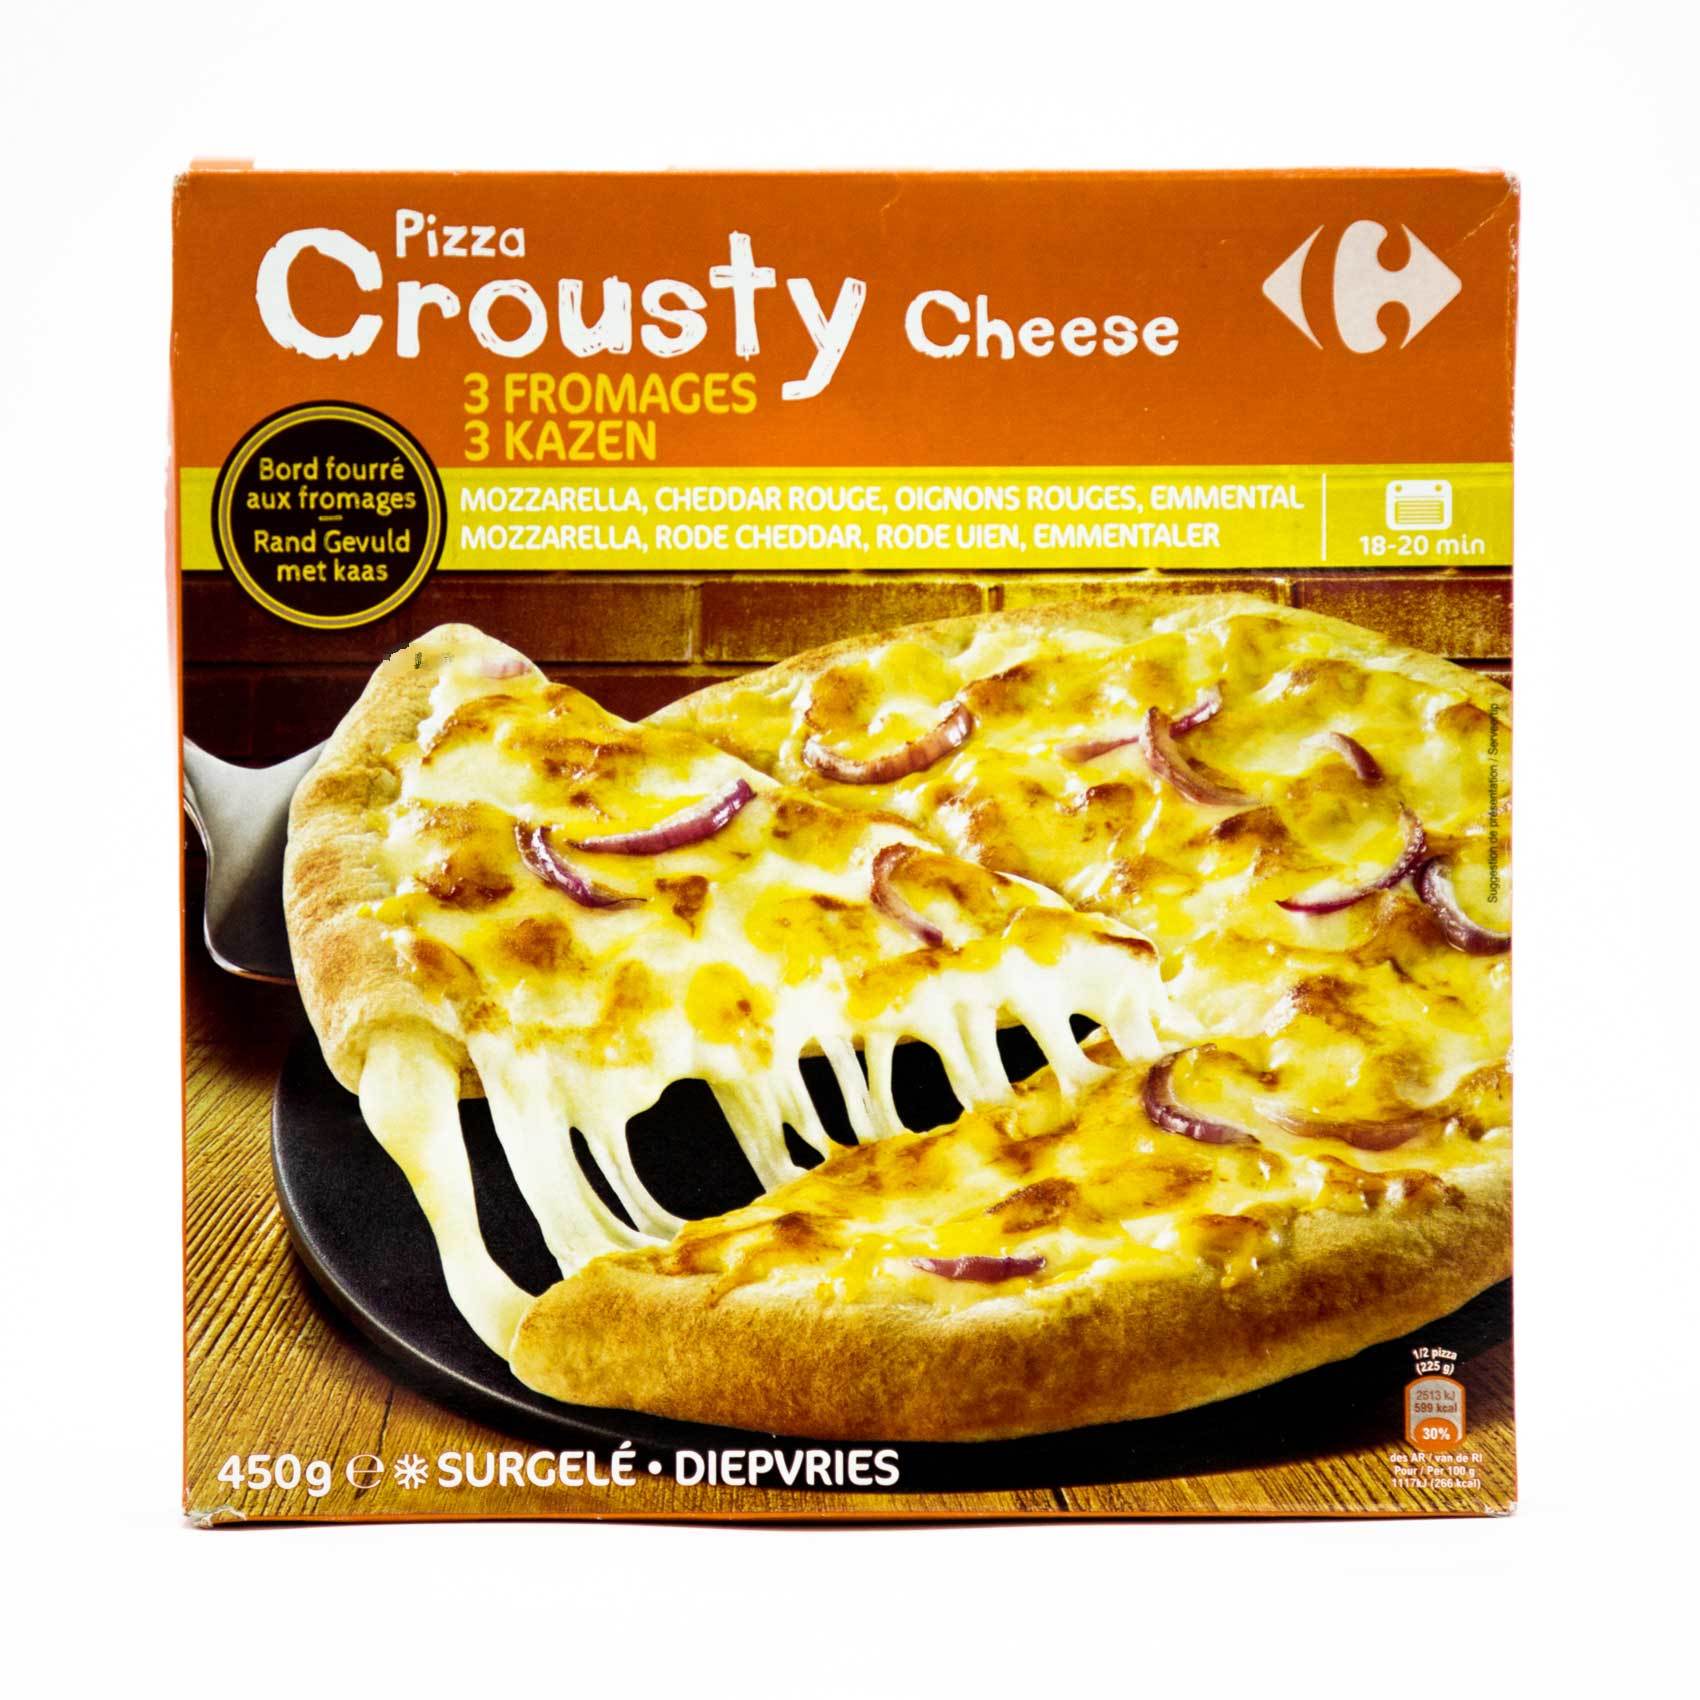 Buy Carrefour Crousty Cheese Pizza 450 G Online Shop Frozen Food On Carrefour Saudi Arabia